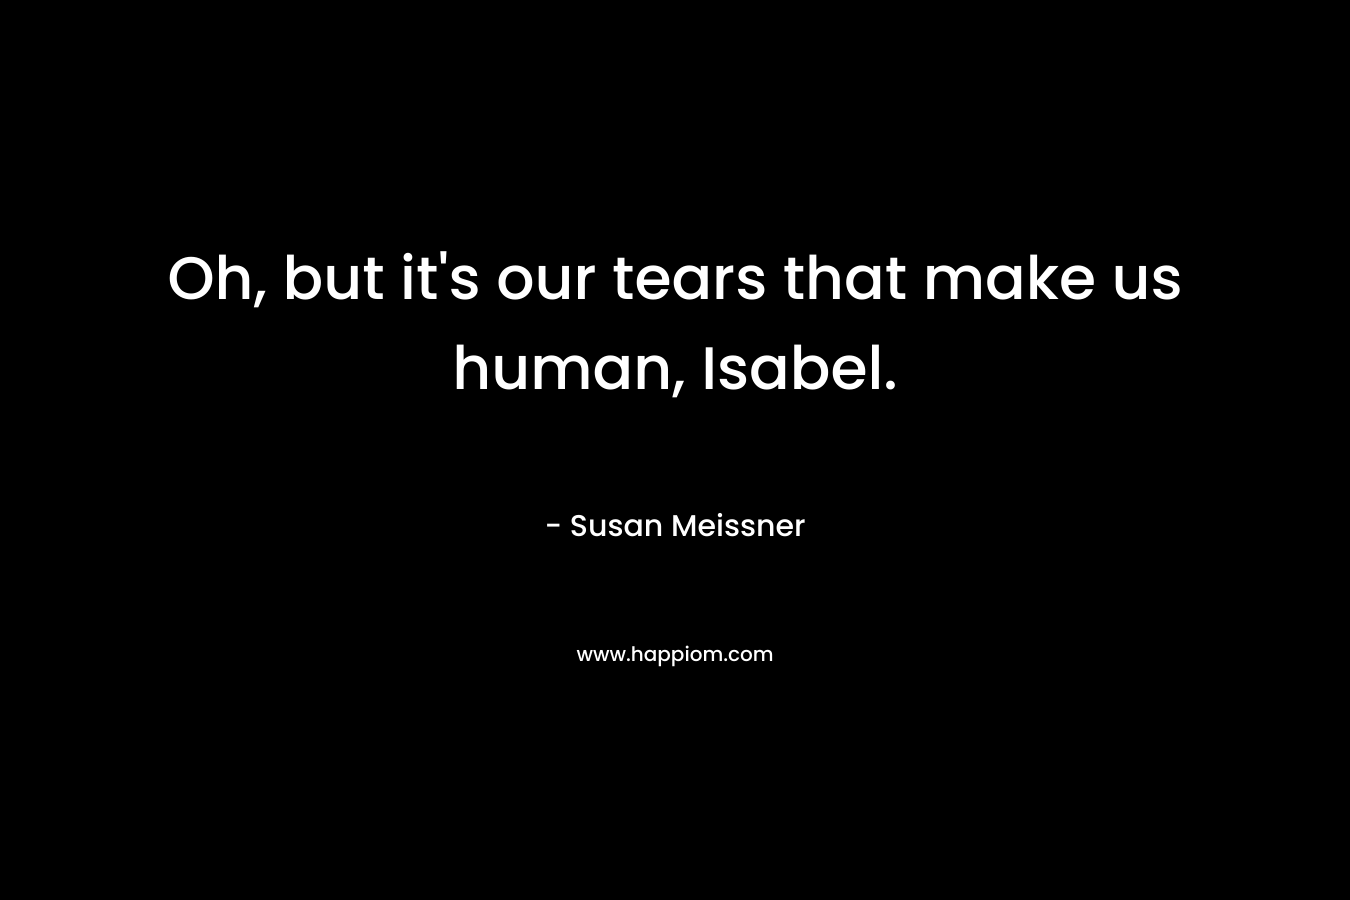 Oh, but it's our tears that make us human, Isabel.